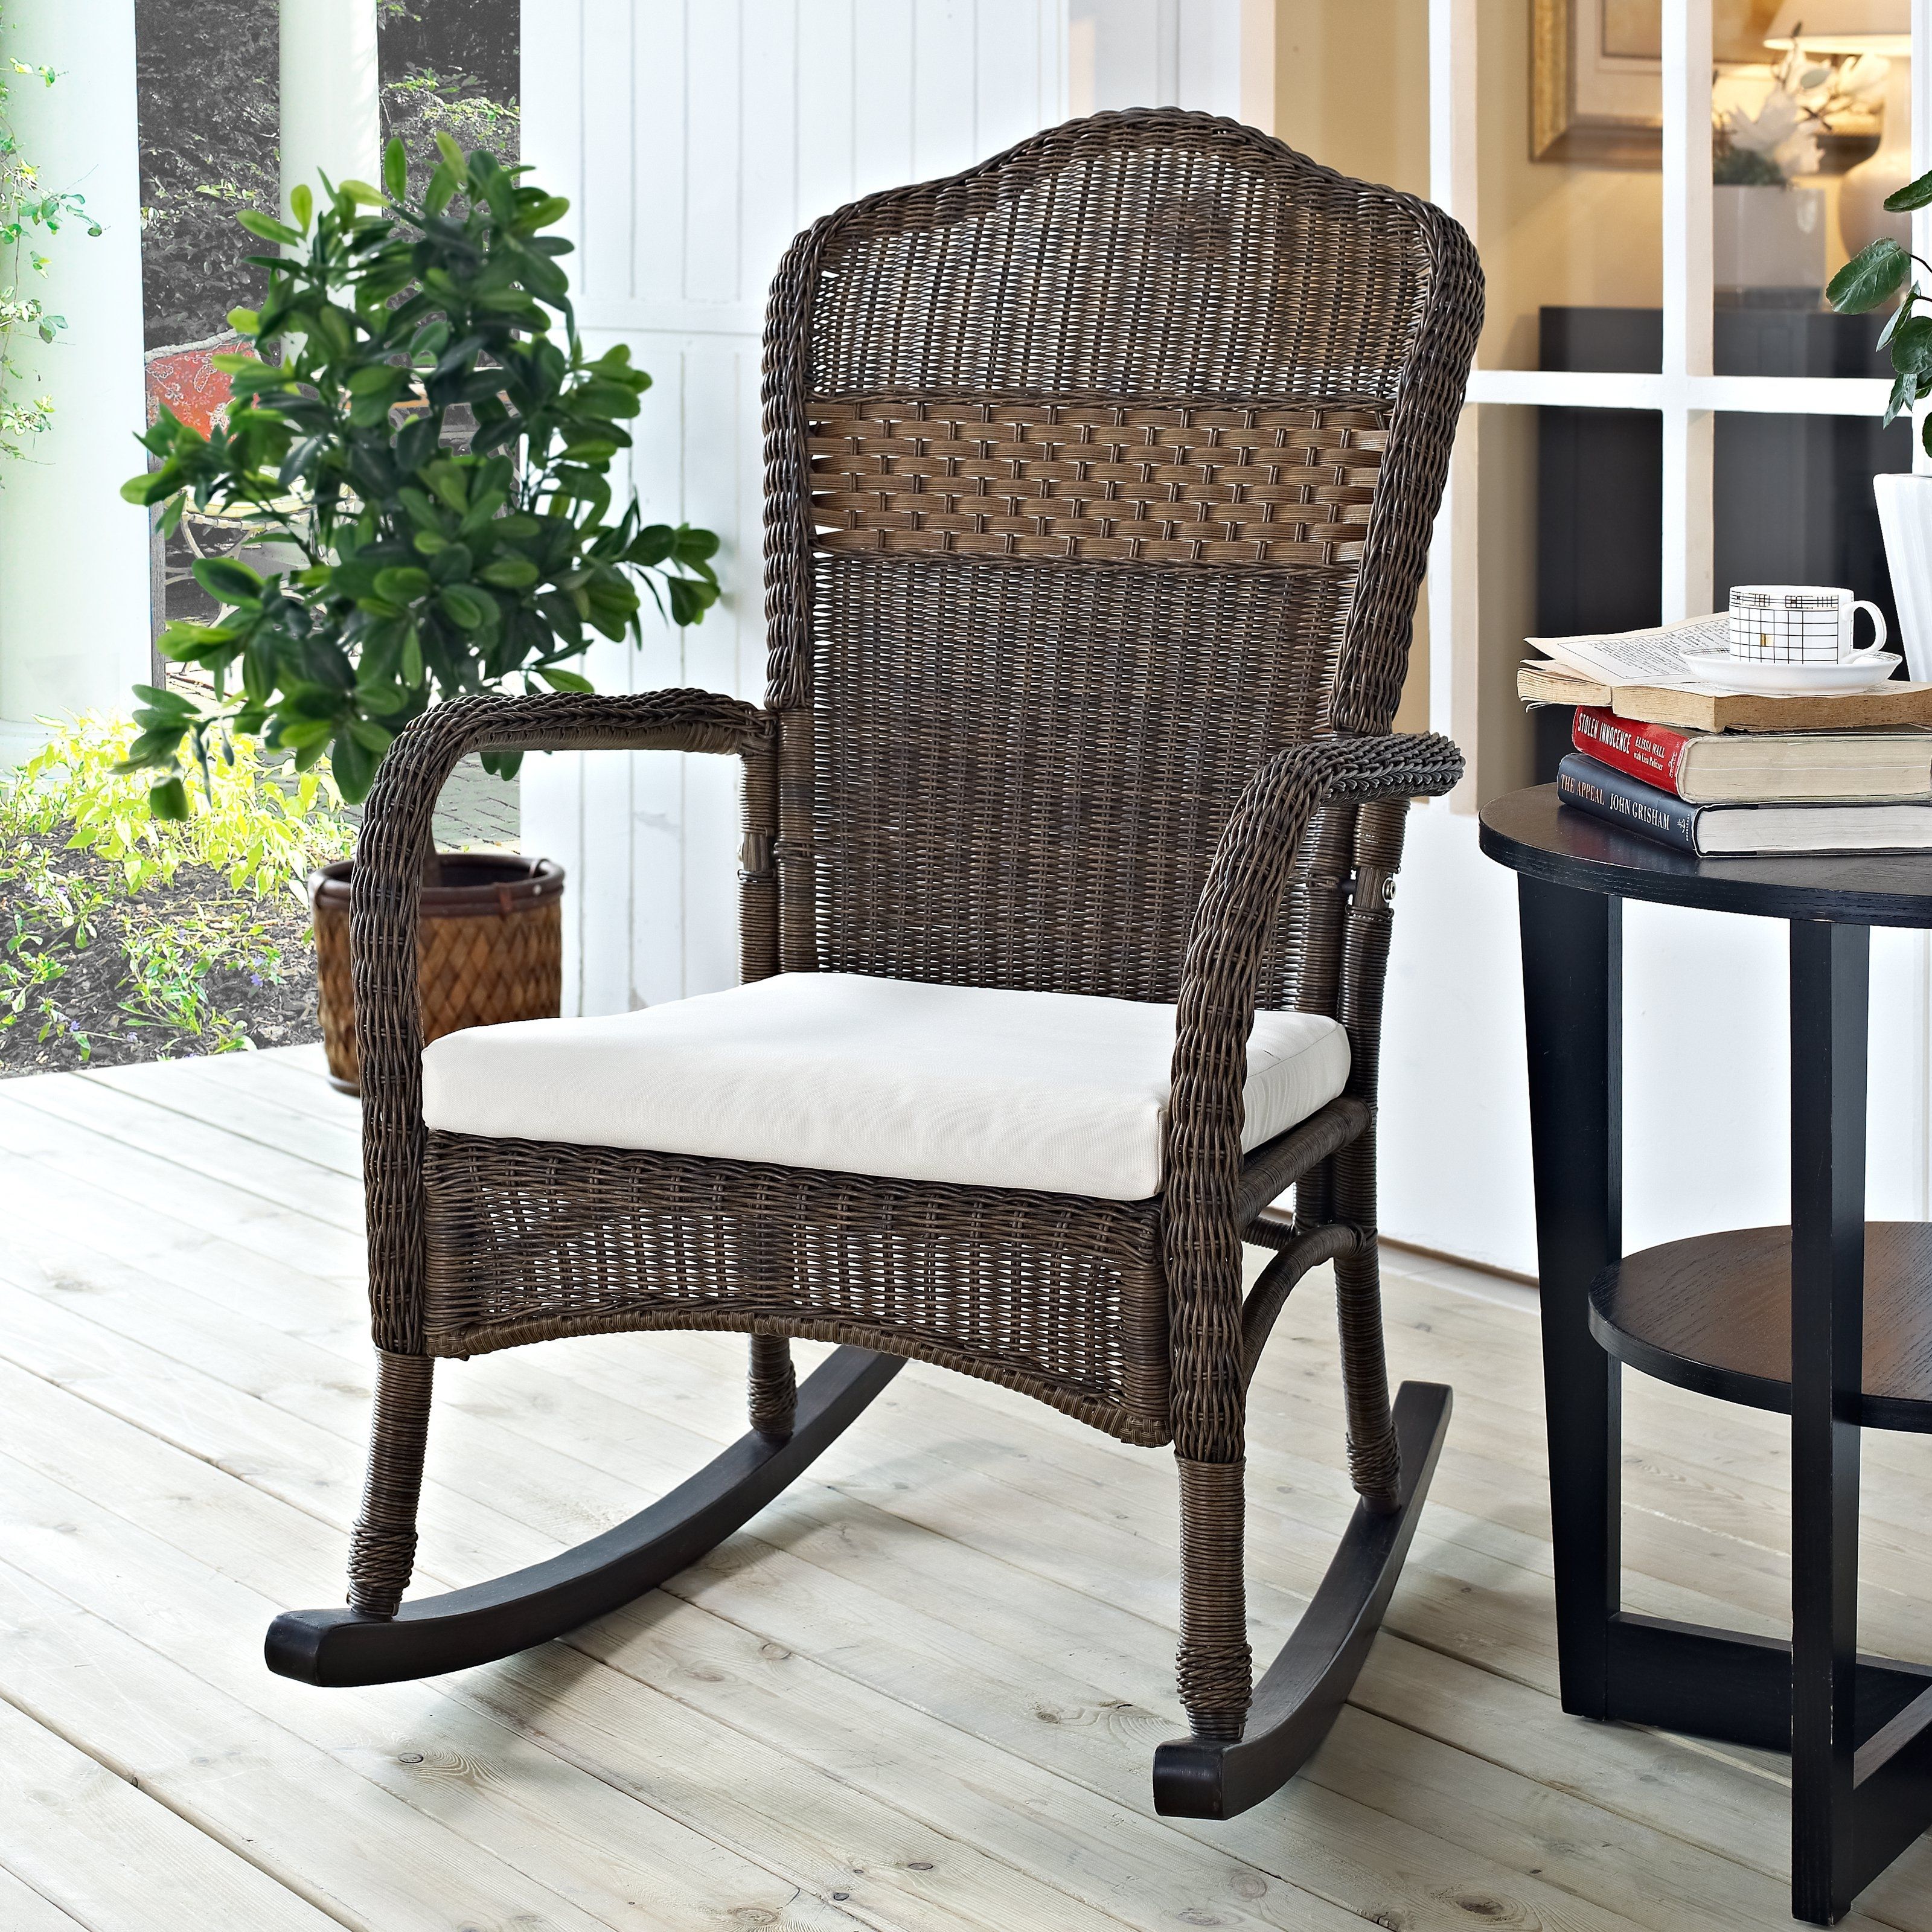 55 White Wicker Rocking Chair, 3 Pc Outdoor Patio Coastal White Throughout White Wicker Rocking Chairs (View 13 of 15)